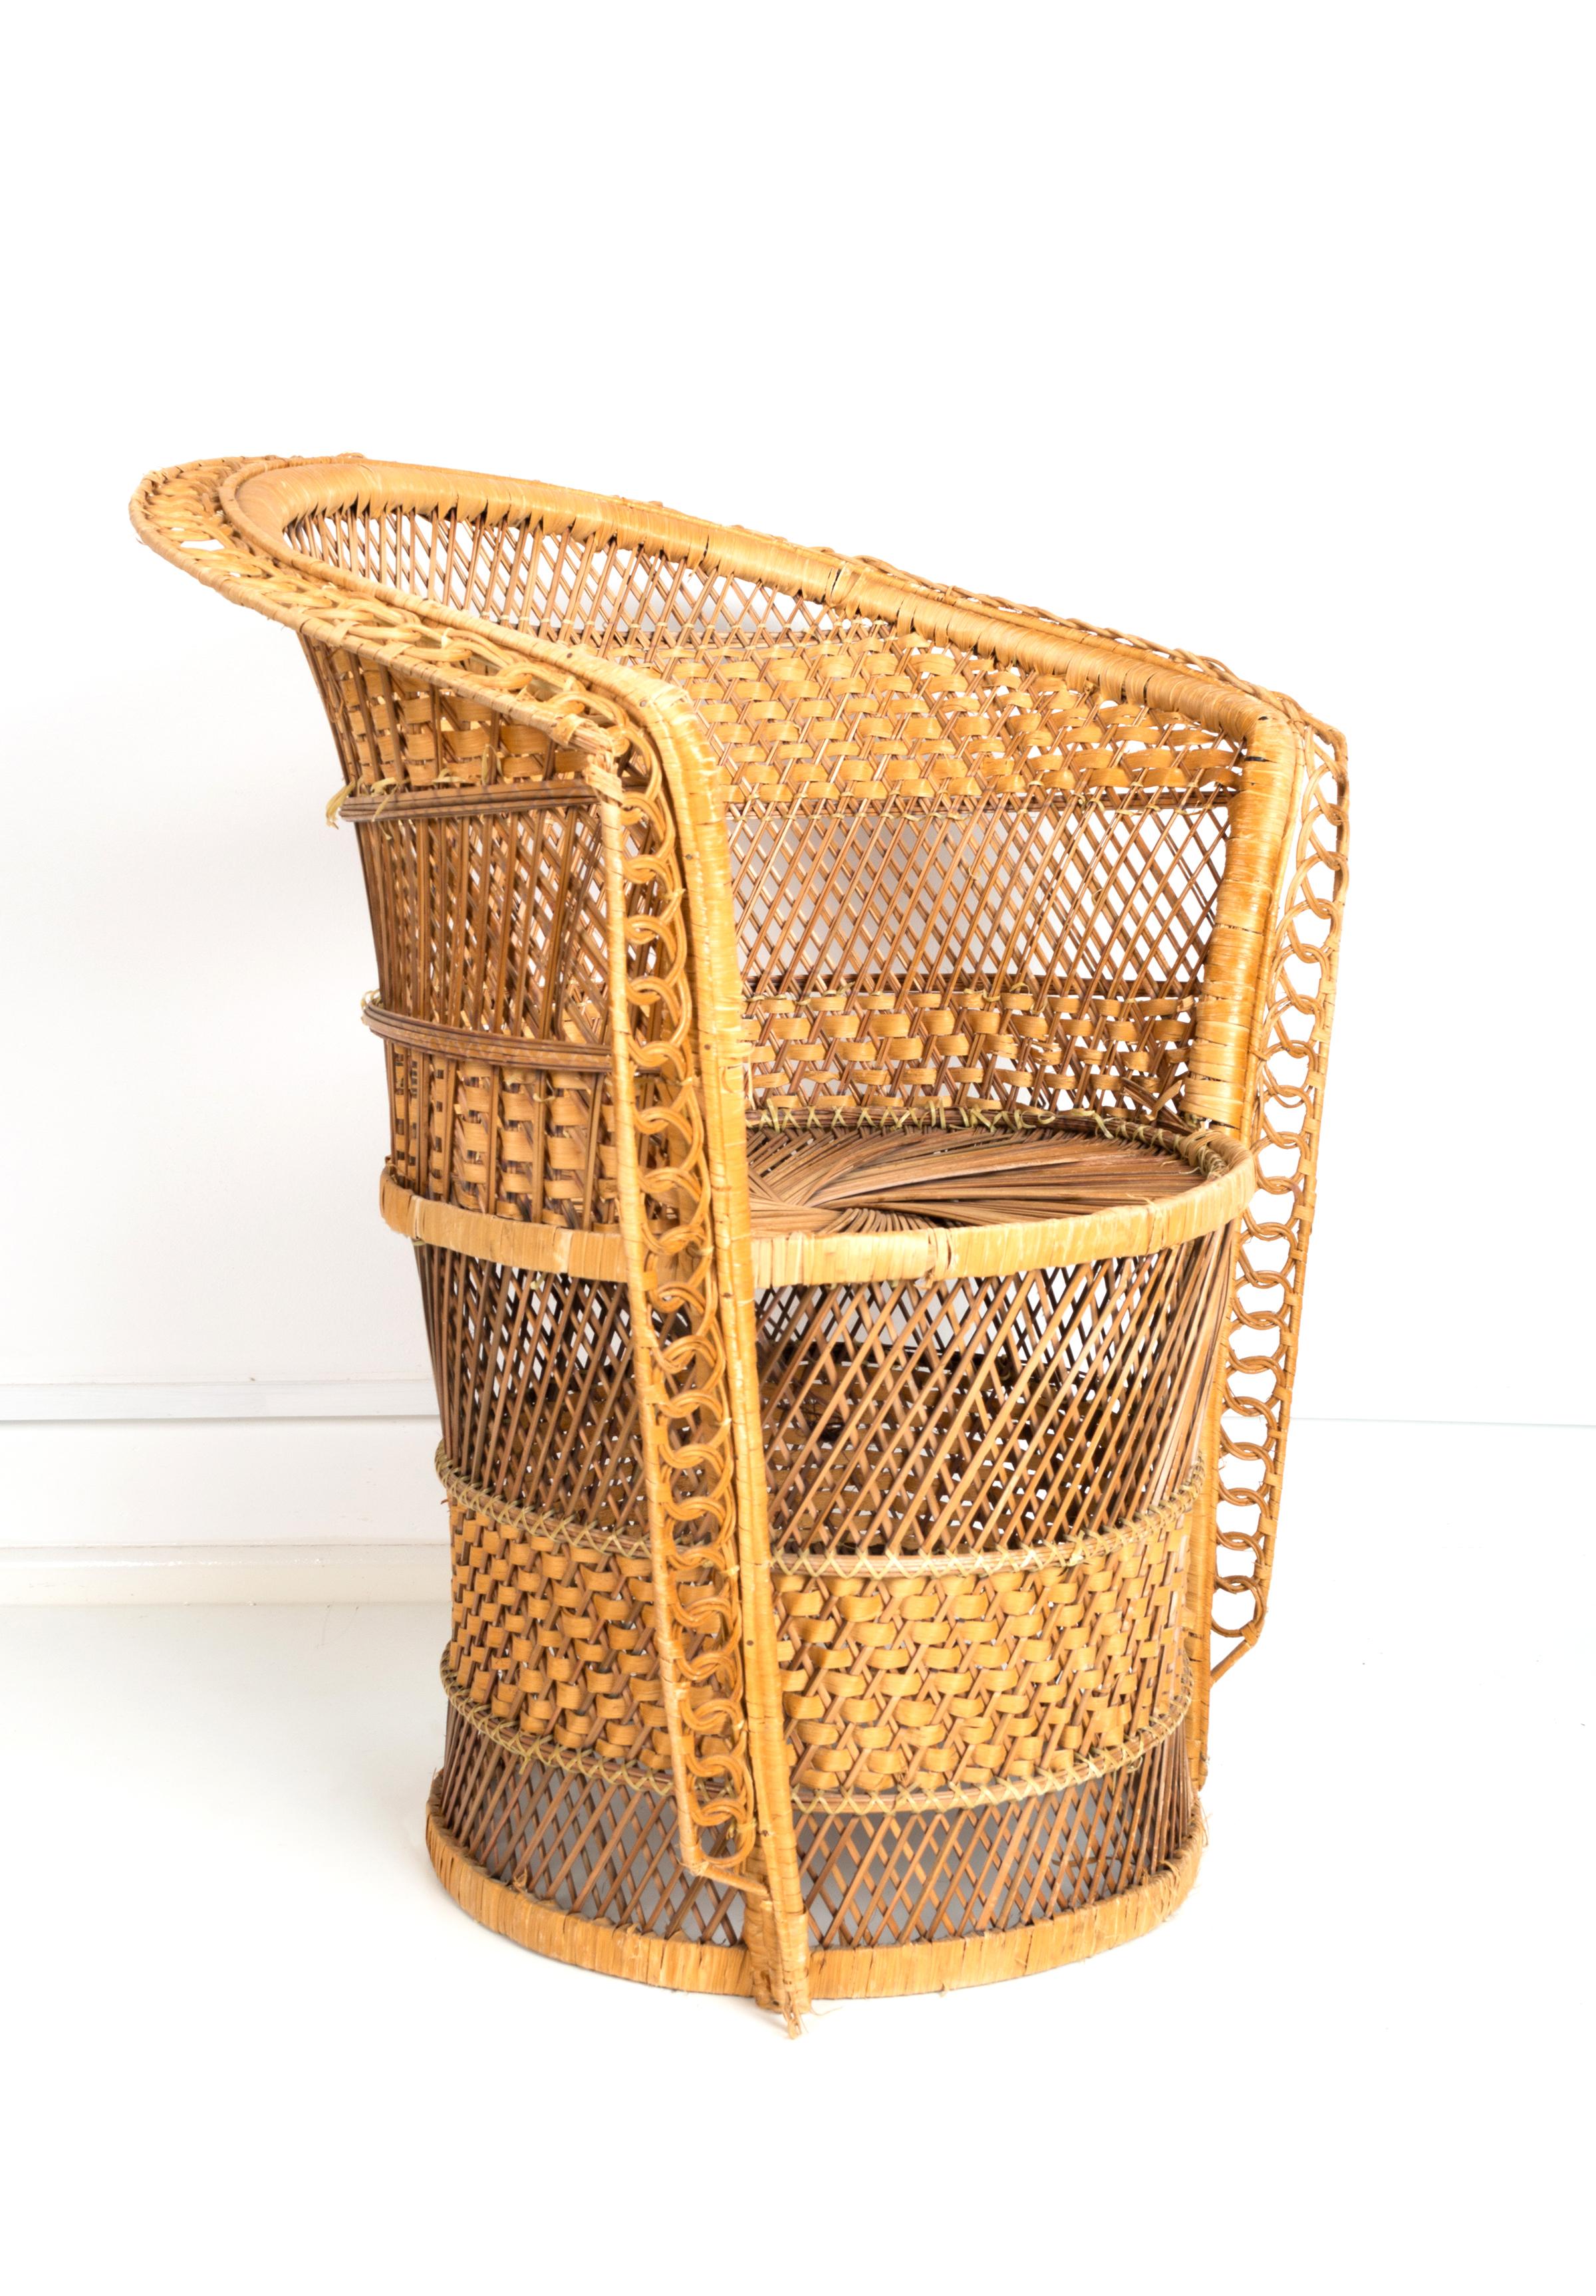 Mid century Peacock Barrel wicker rattan chair. C.1960 Italy

In good condition, with general signs of wear commensurate with age, please see photos.